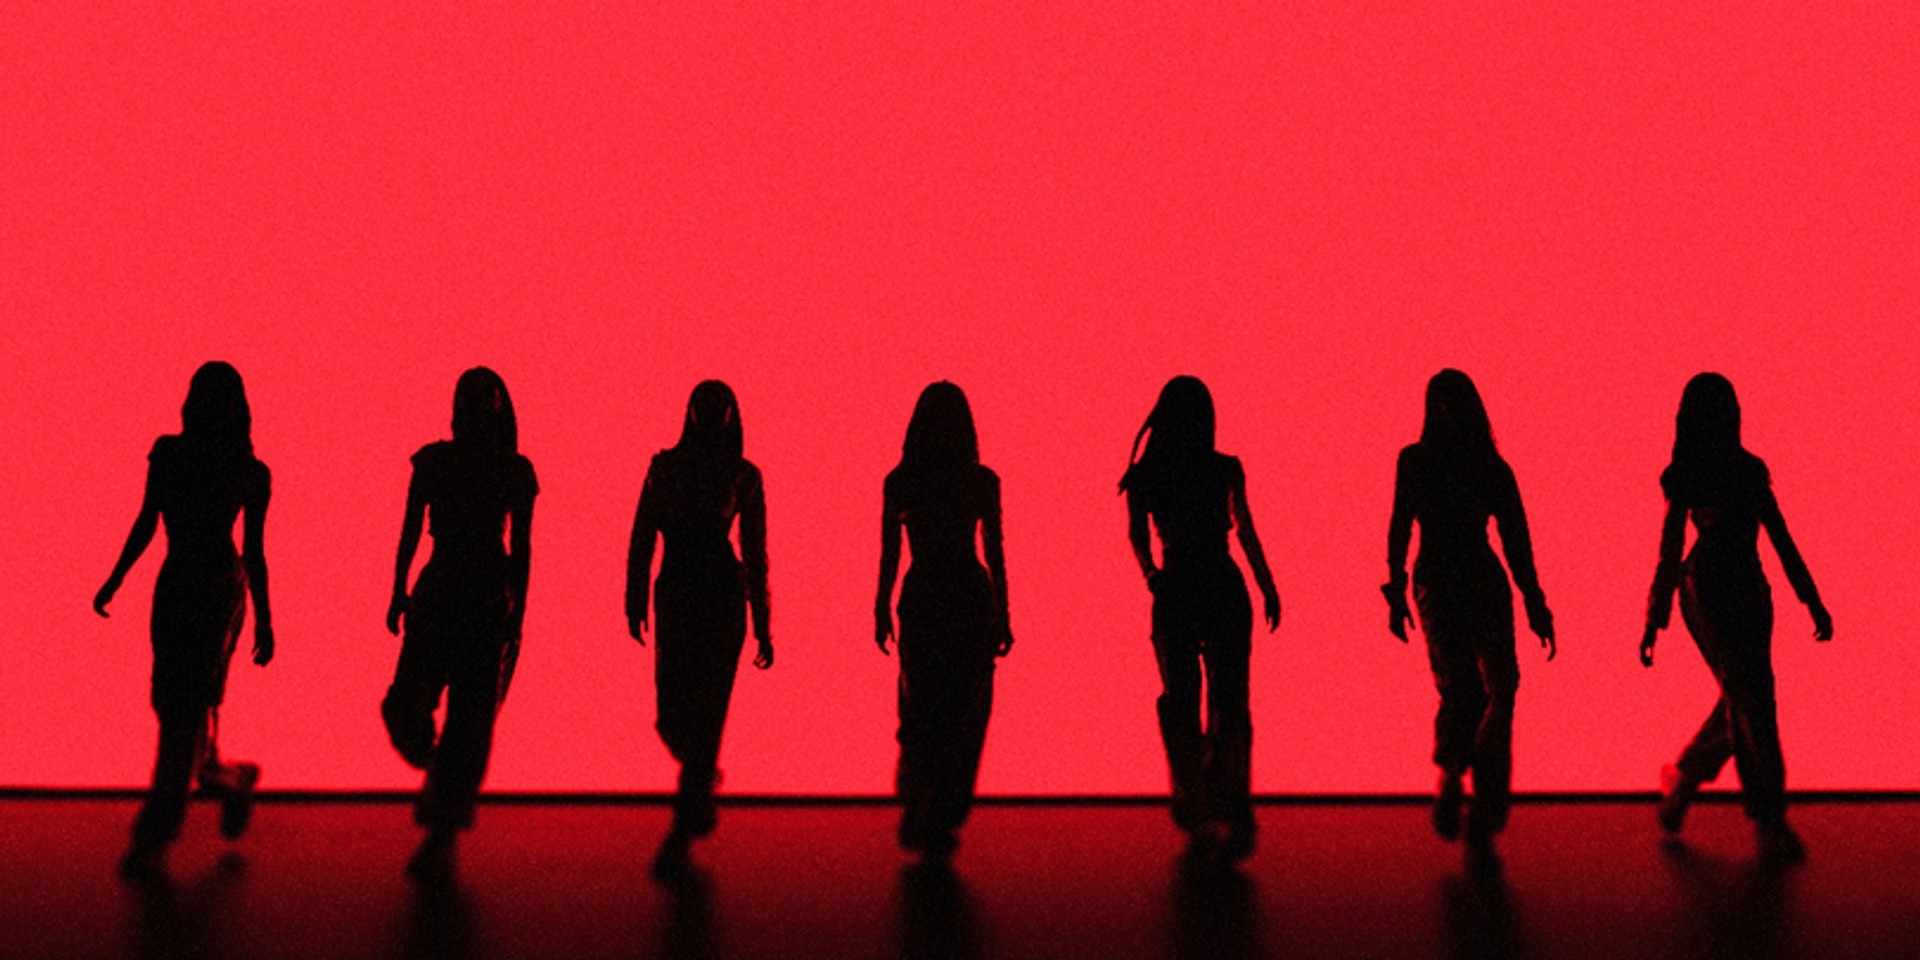 YG Entertainment teases new girl group as part of "YG NEXT MOVEMENT" project